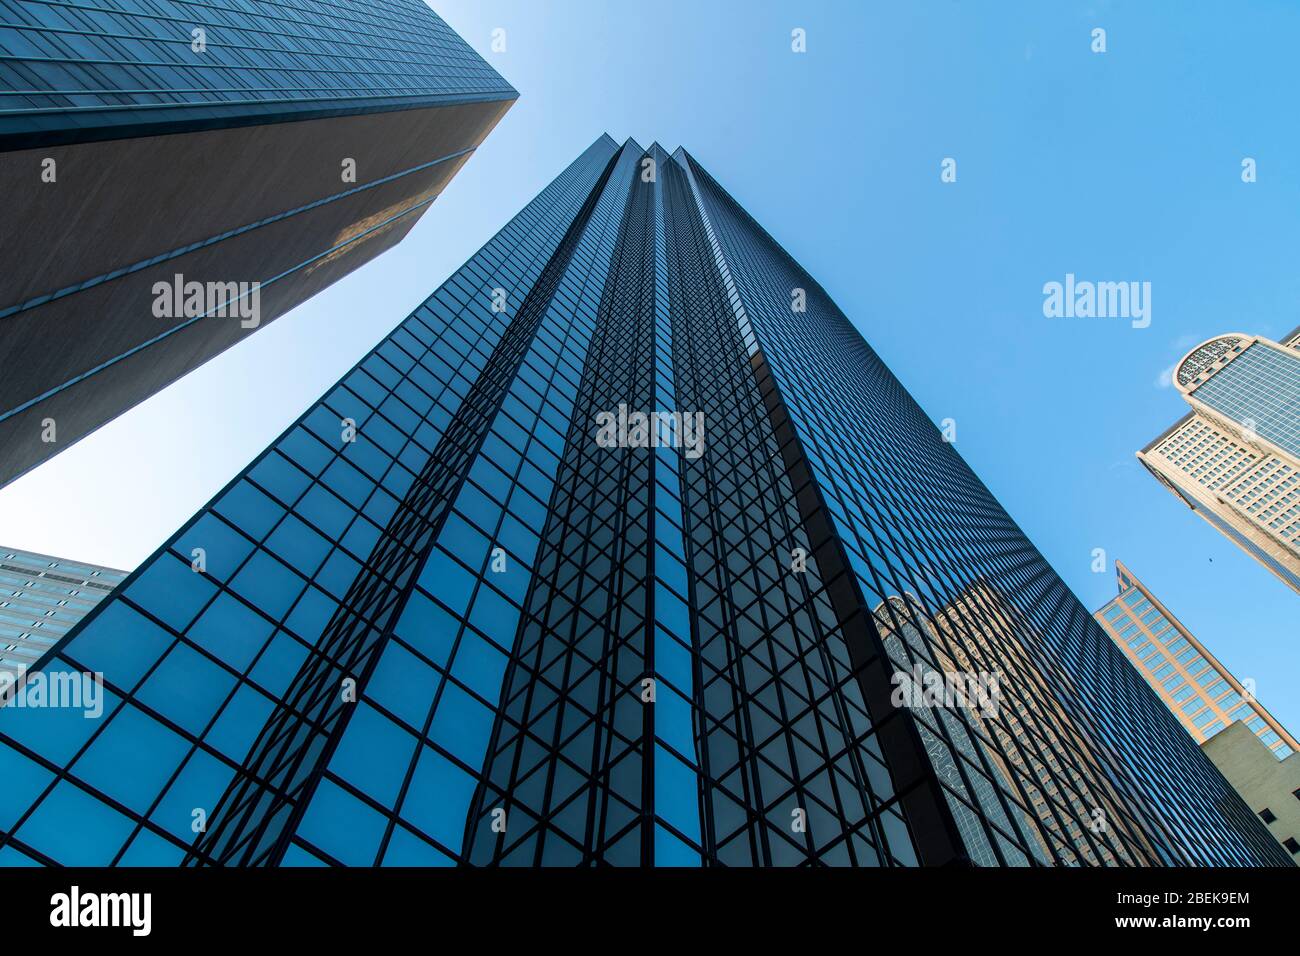 Dallas, Texas, USA. Downtown. Bank of America Plaza is a 72-story, 280.7 m (921 ft) late-modernist skyscraper located in the Main Street District in t Stock Photo